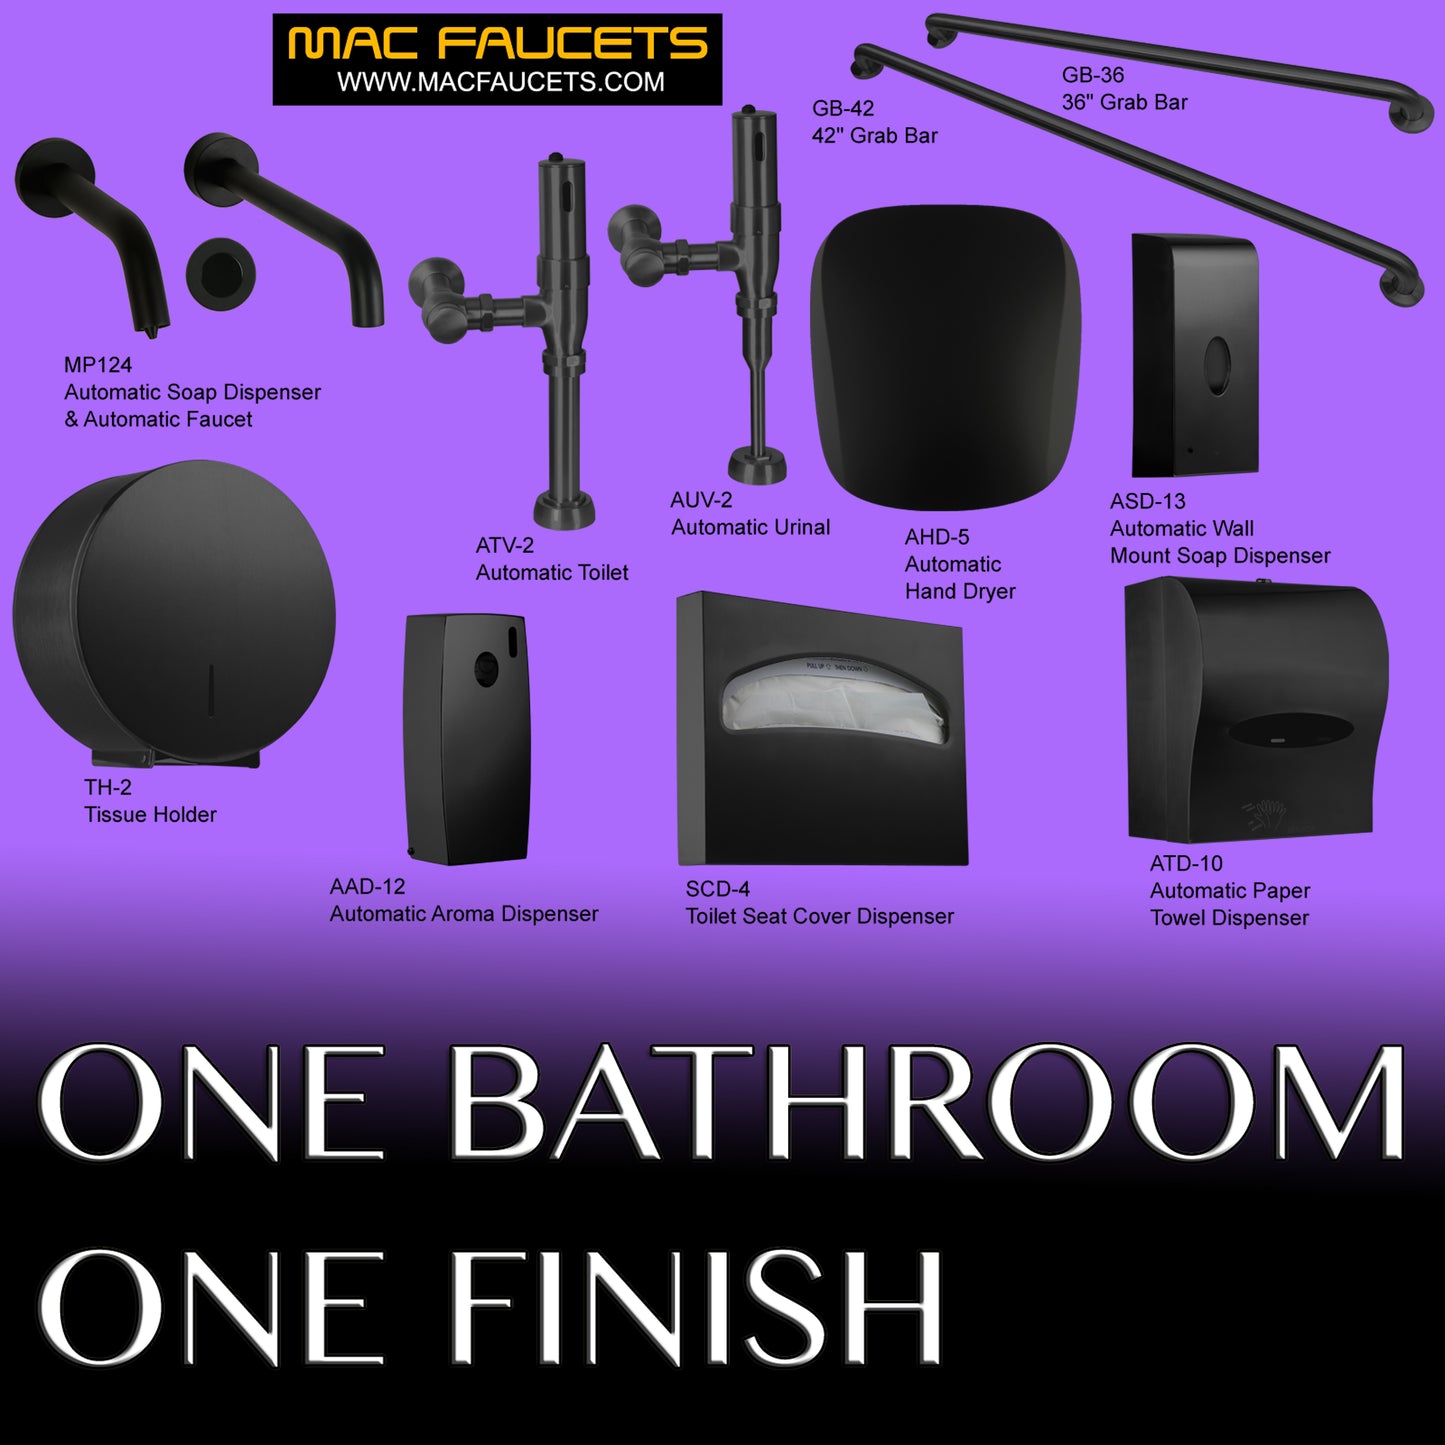 Automatic urinal & toilet flushers, soap dispenser, and faucet in Matte Black finish